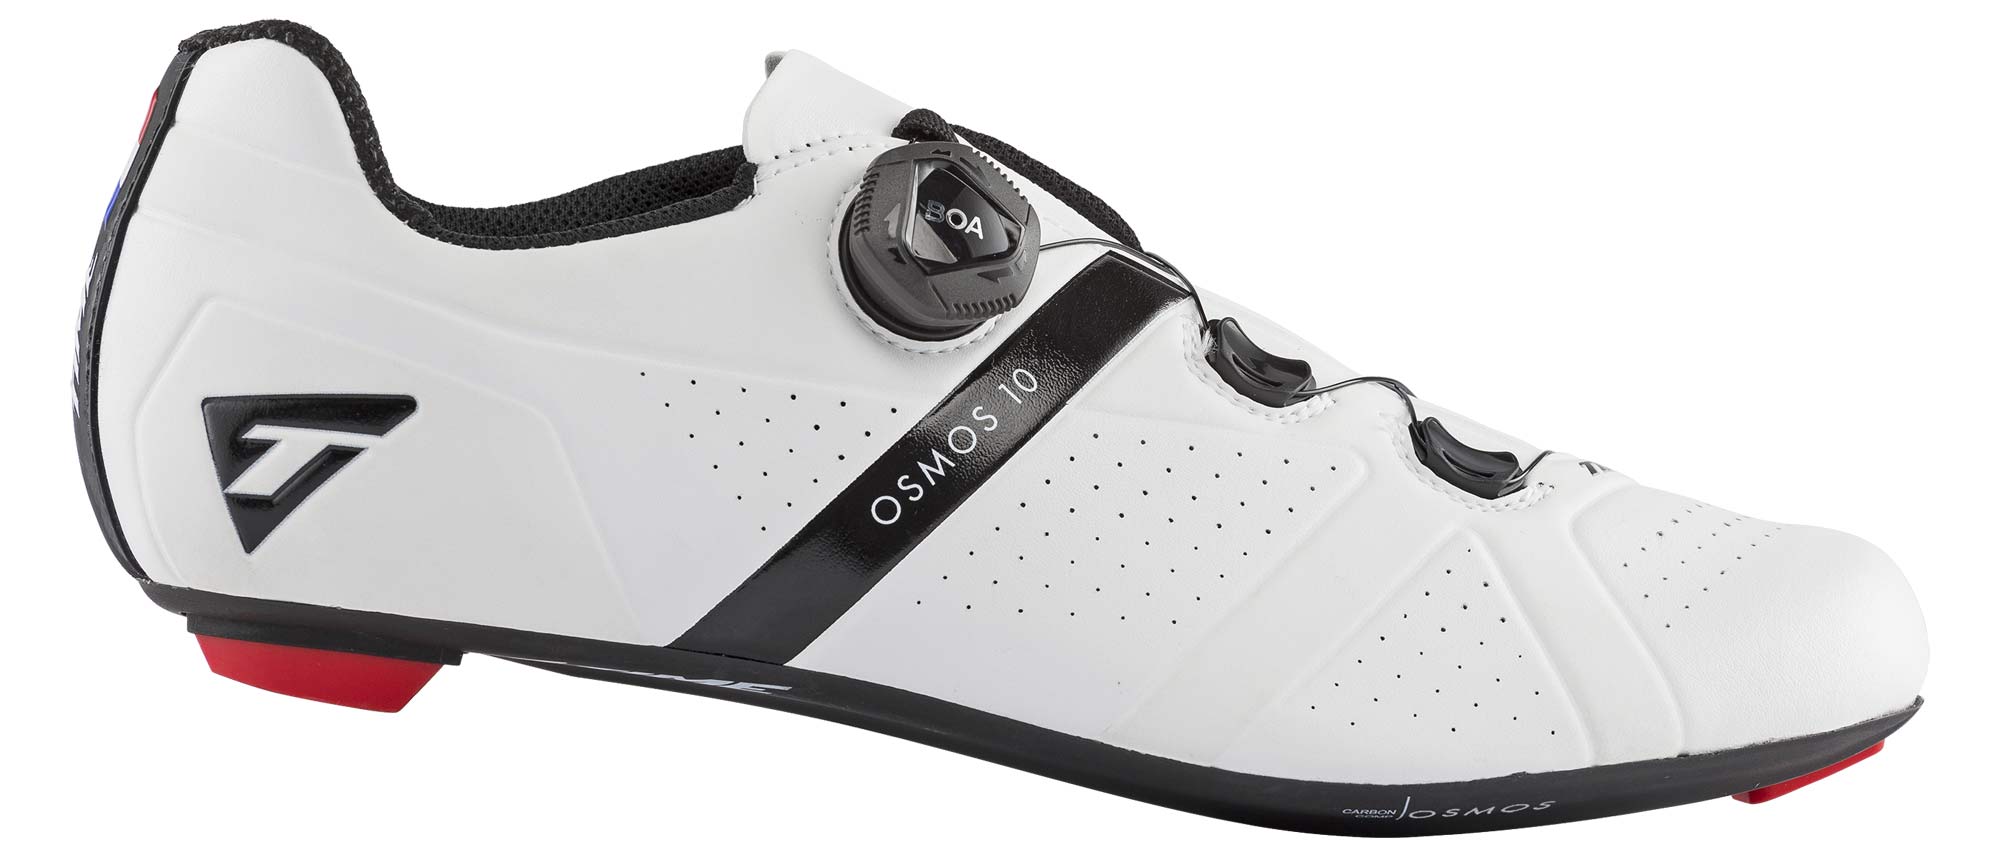 Time Osmos dials up broad, all-new carbon performance road shoe